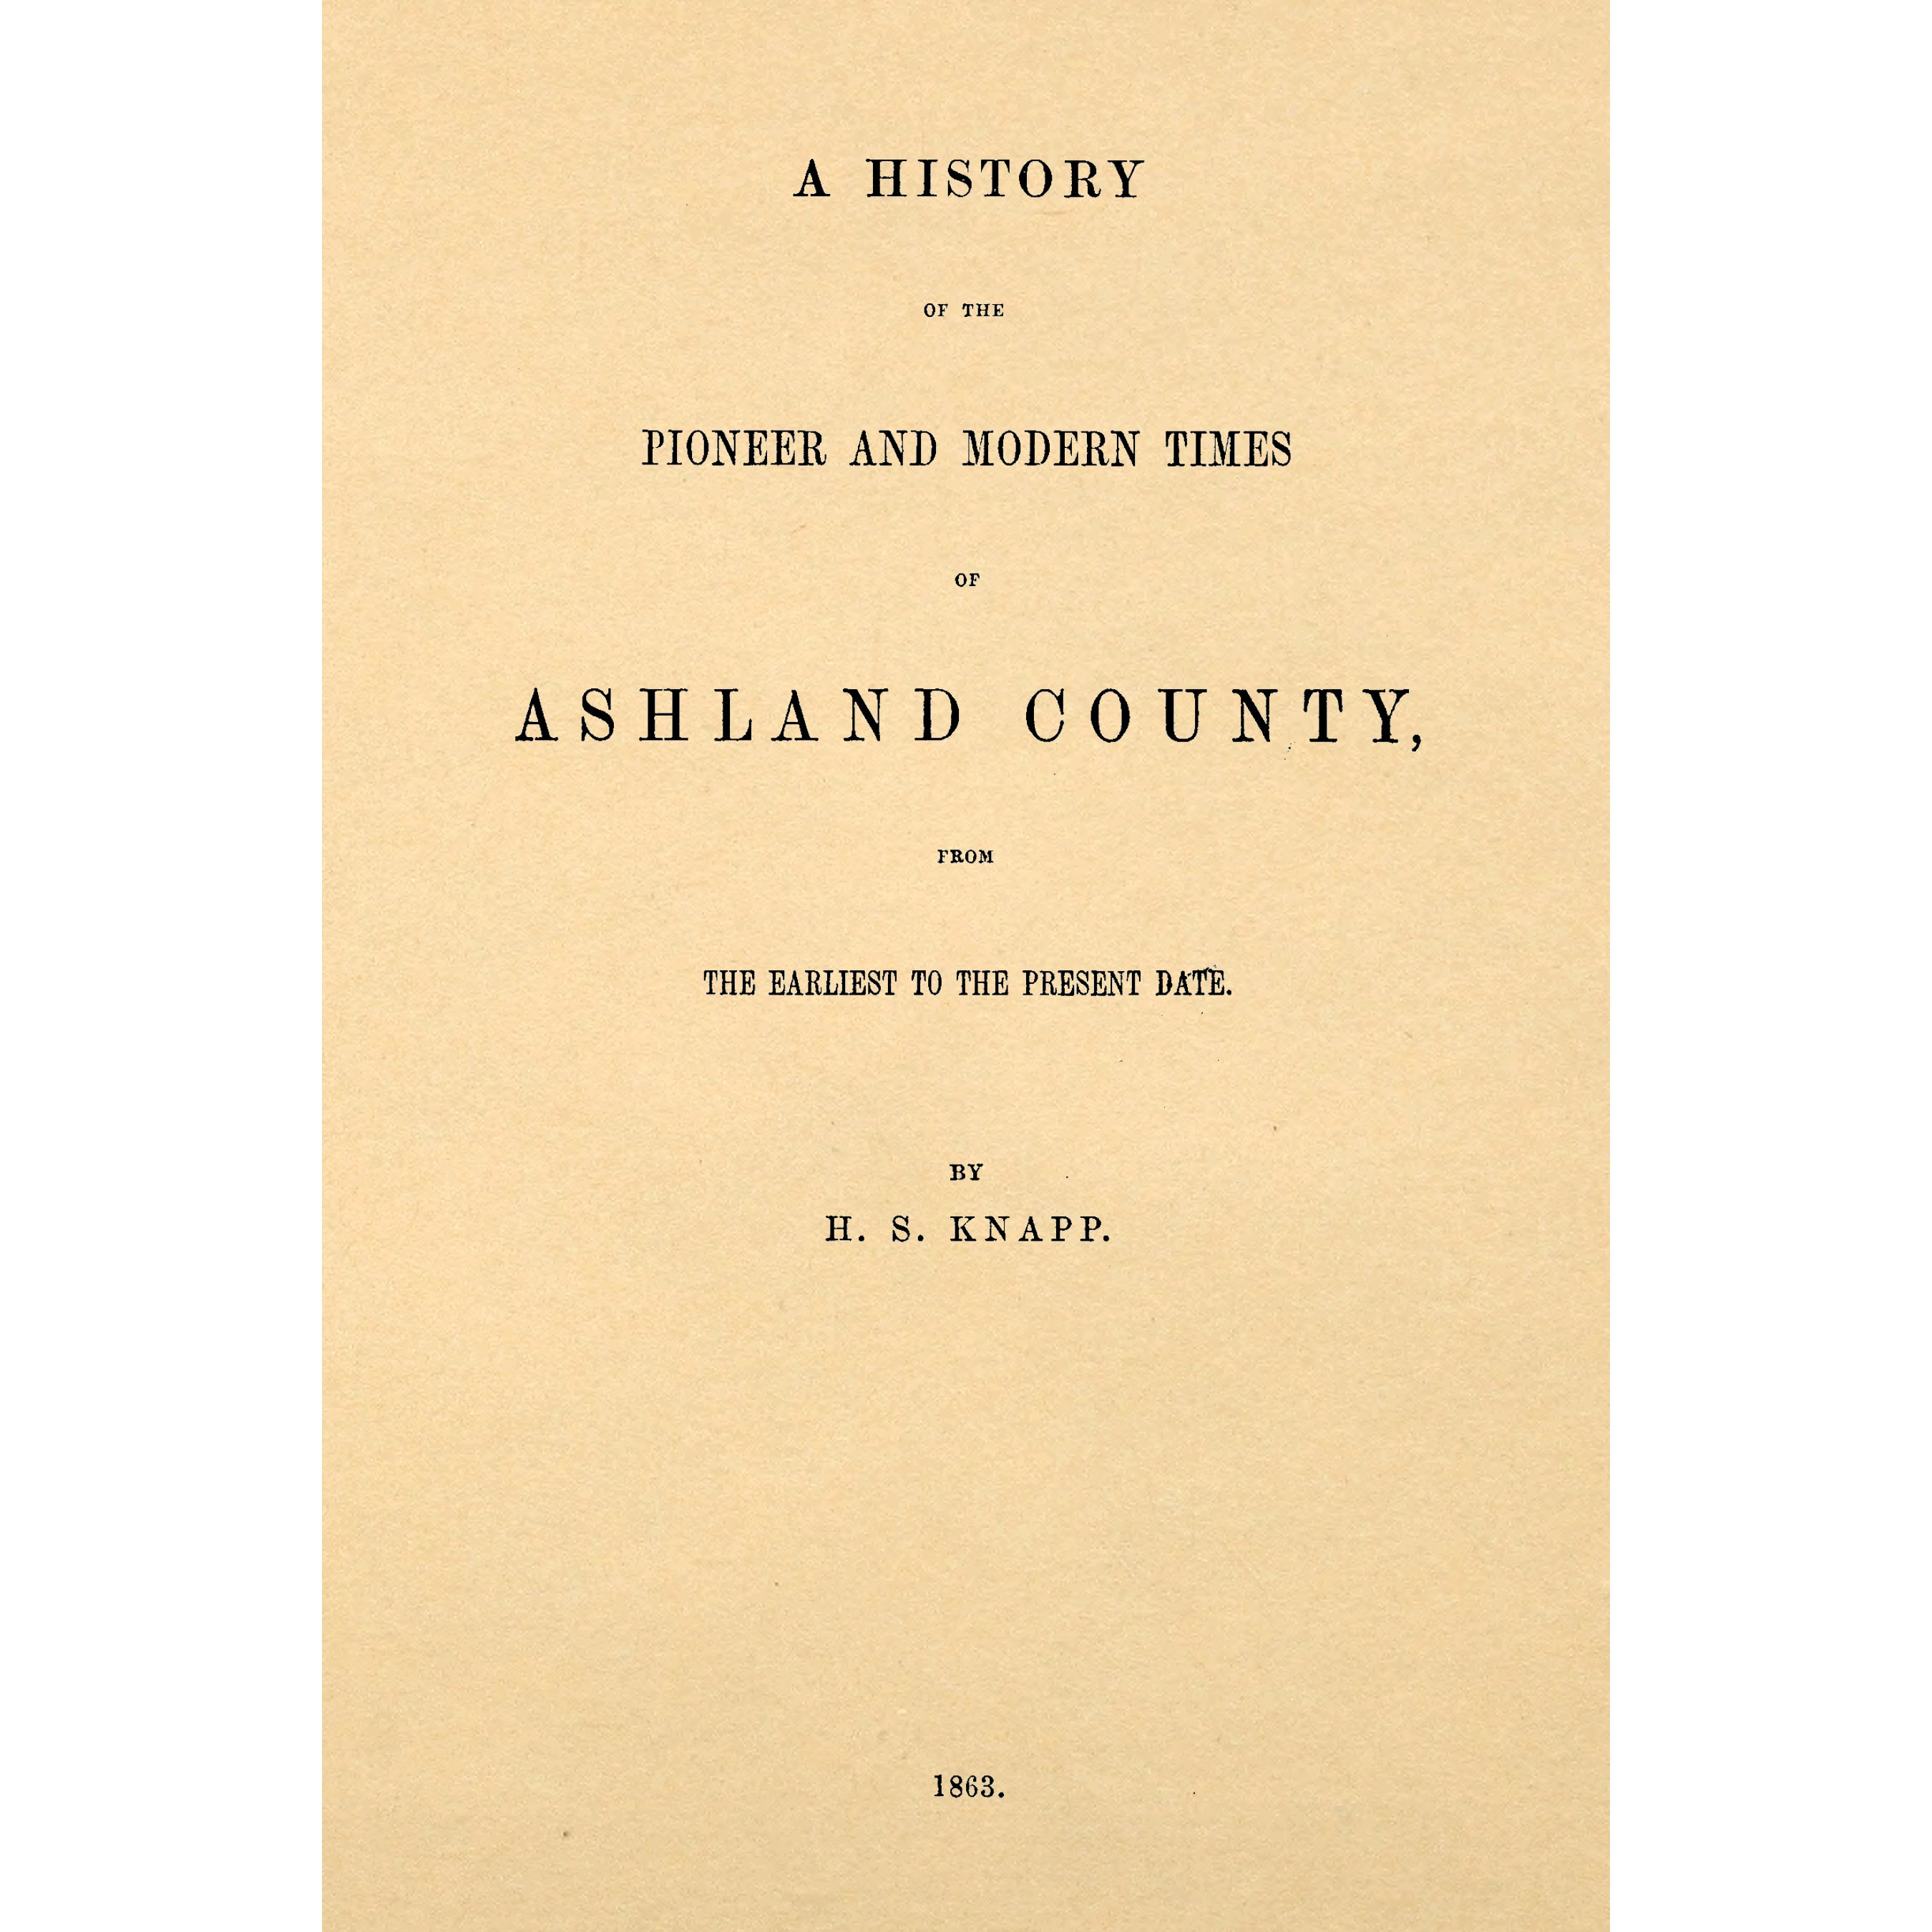 A History of the Pioneer and Modern Times of Ashland  County [Ohio], From the Earliest To the Present Date [1863]